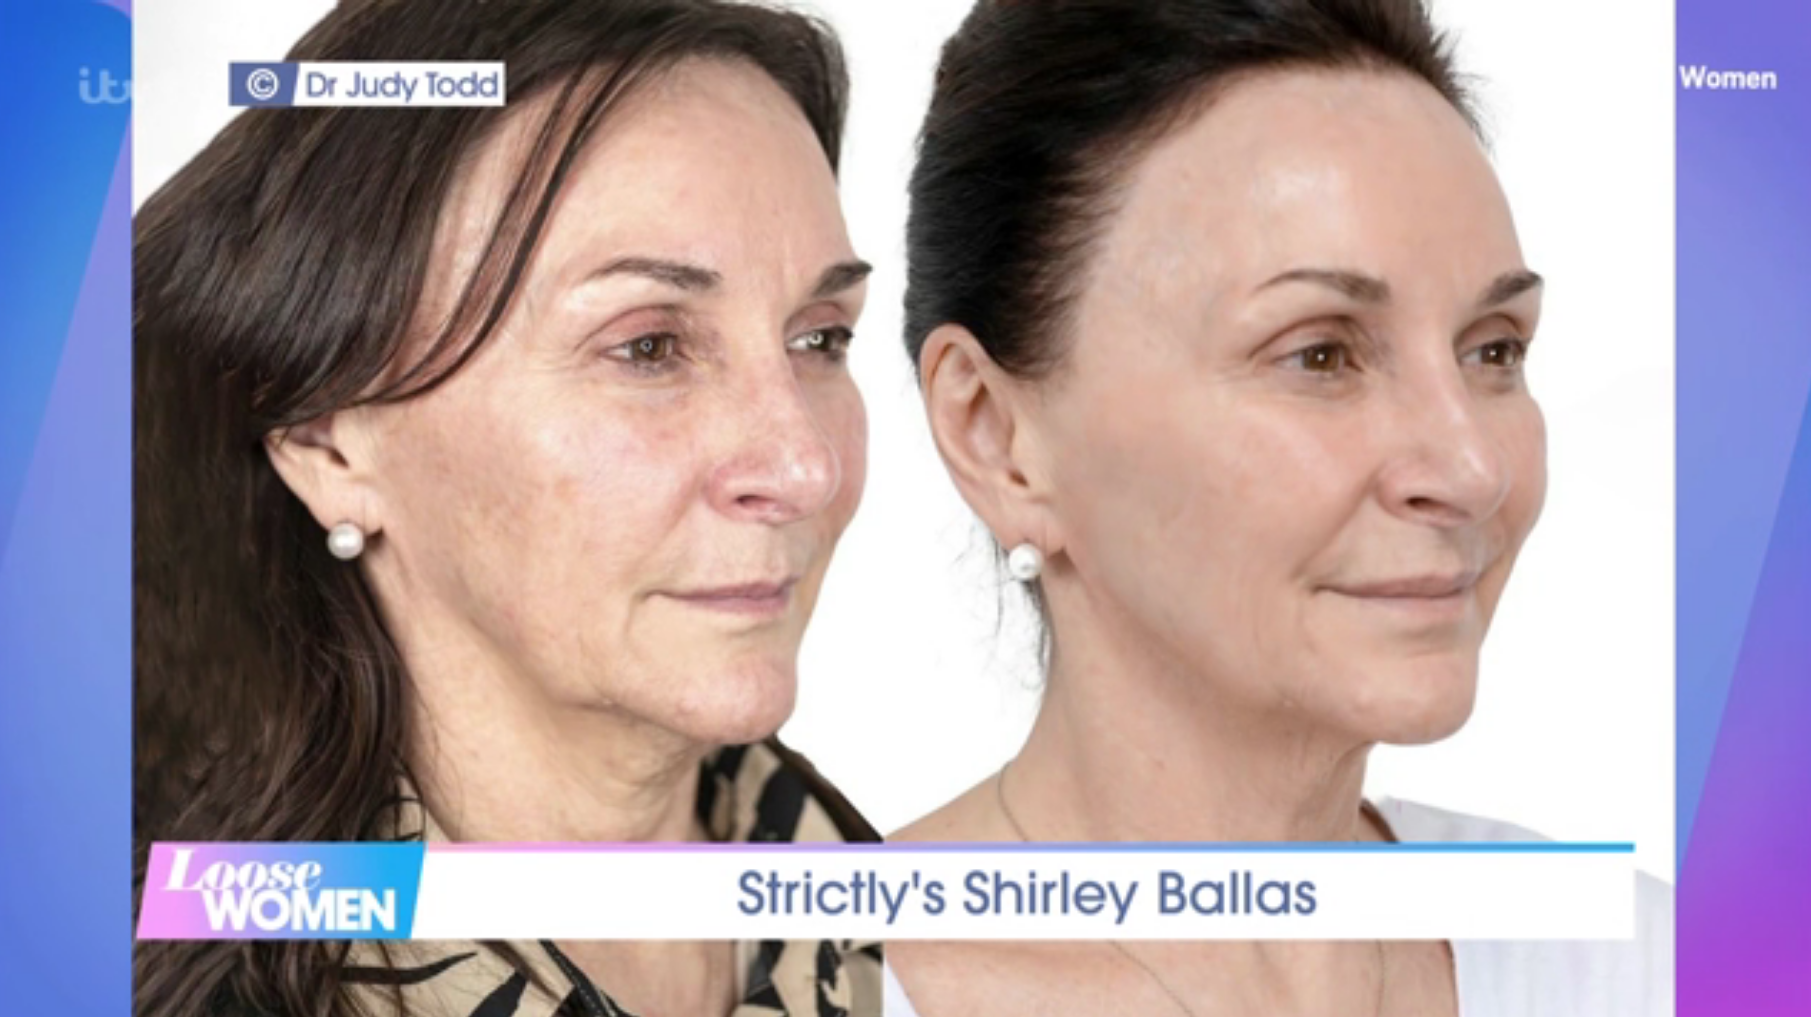 A composite aired on Loose Women shows Shirley Ballas’ before and after facelift photos